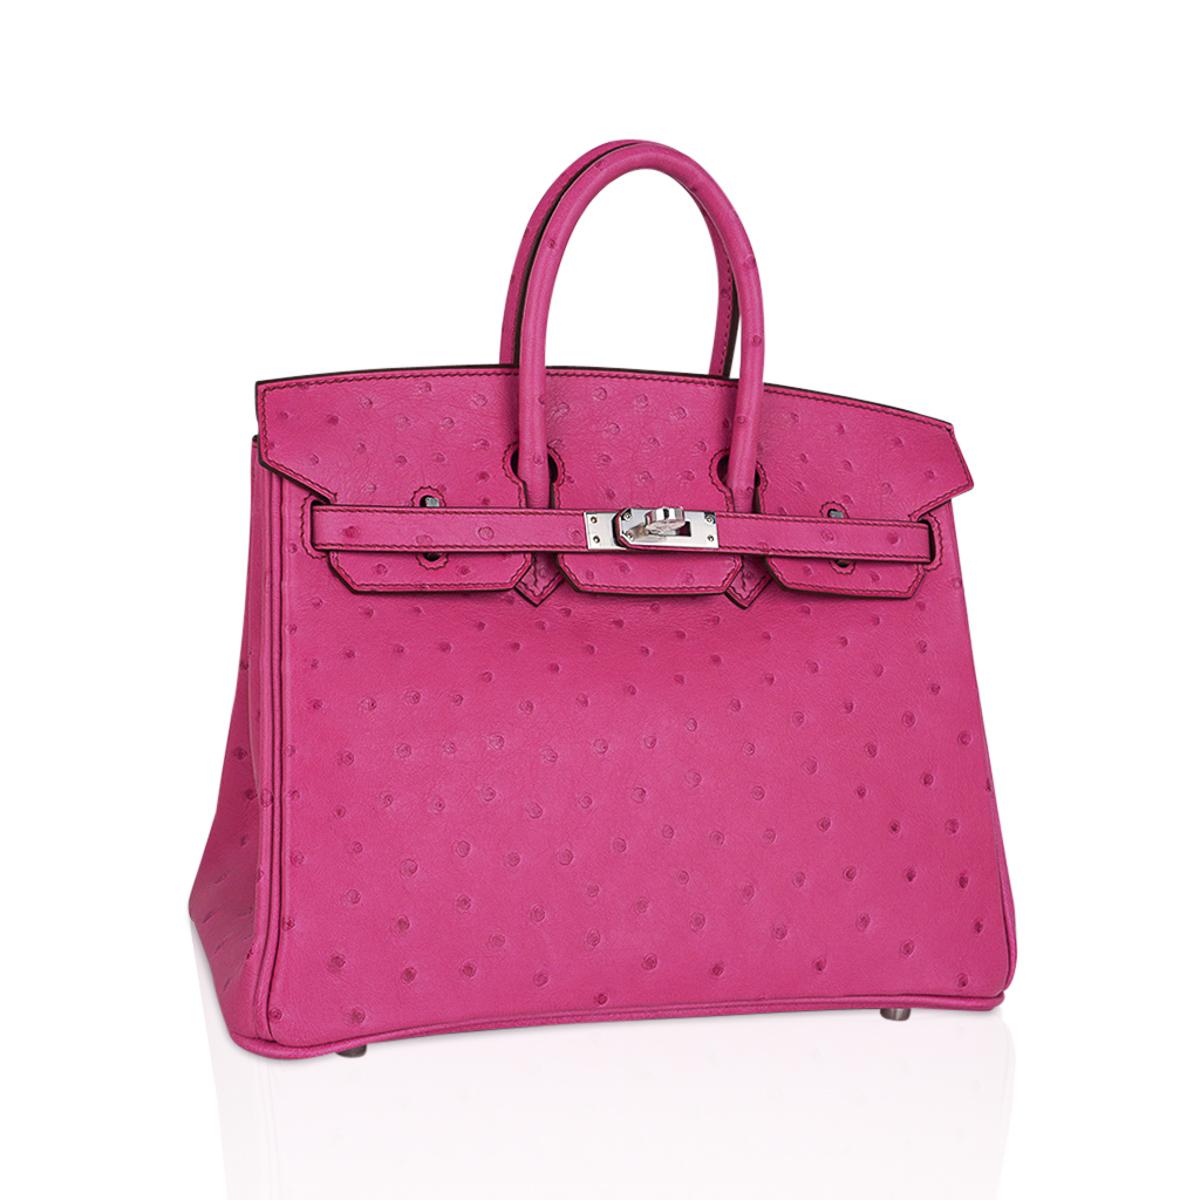 Mightychic offers an Hermes Birkin 25 bag featured in rare Fuchsia pink Ostrich.
Rarely produced colour this exquisite beauty is a must have for any Hermes aficionado.
This Hermes Birkin bag is accentuated with Palladium  hardware, and is nothing